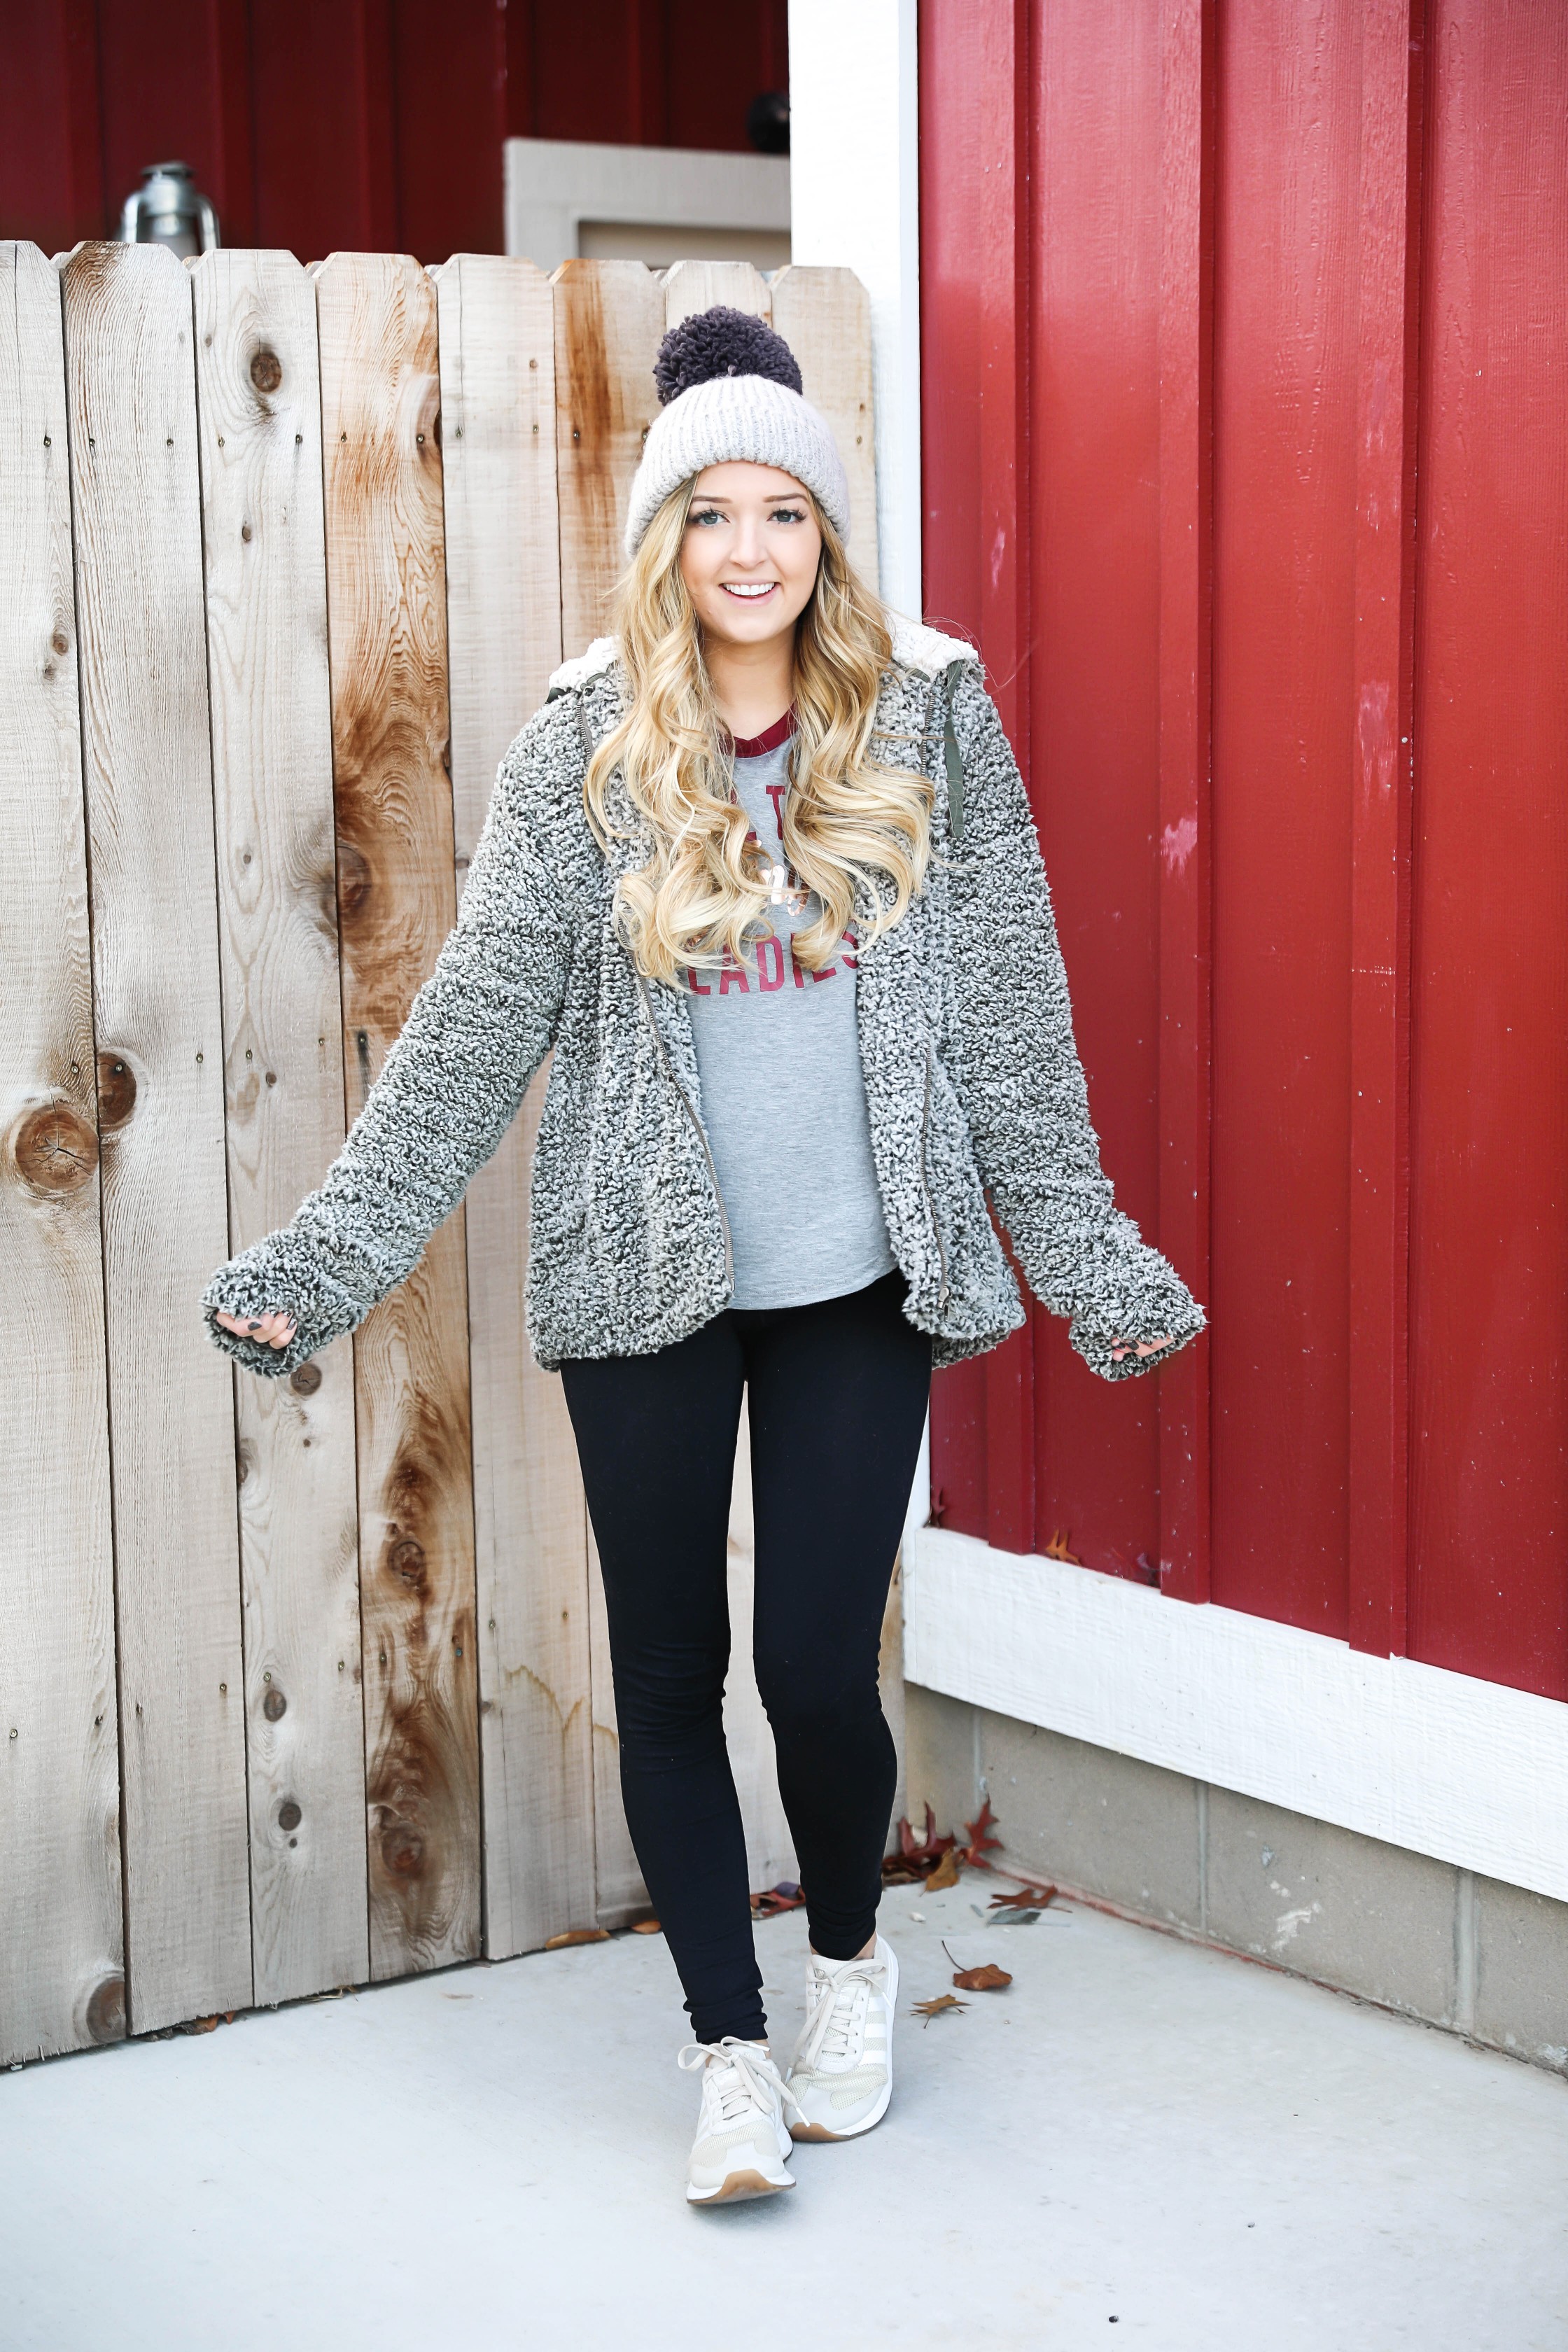 The softest sherpa zip up jacket! This Jacket is so comfortable and adorable for the holidays! I wore it with this cute grey beanie and all the jingle ladies shirt! Cute idea for a comfy winter outfit! Details on fashion blog daily dose of charm by lauren lindmark